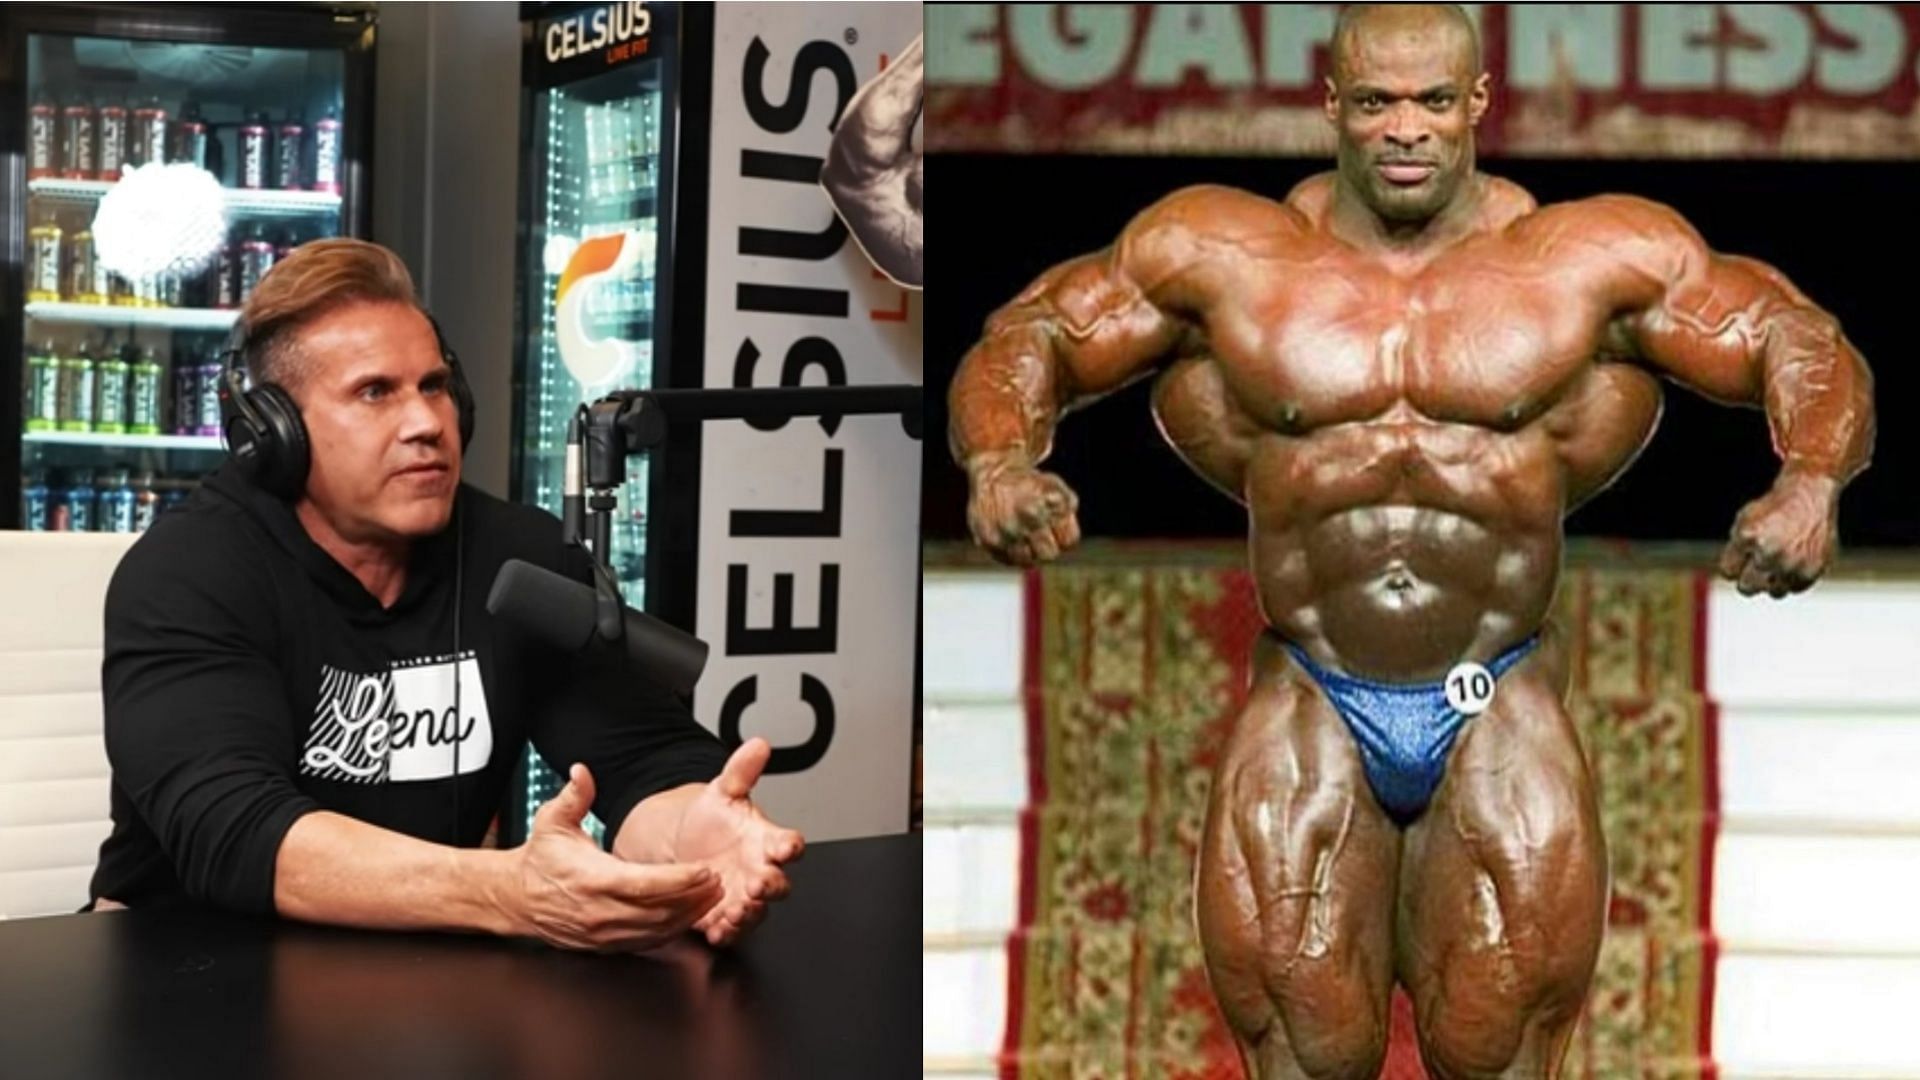 Jay Cutler, Ronnie Coleman, and Phil Heath are indeed legendary